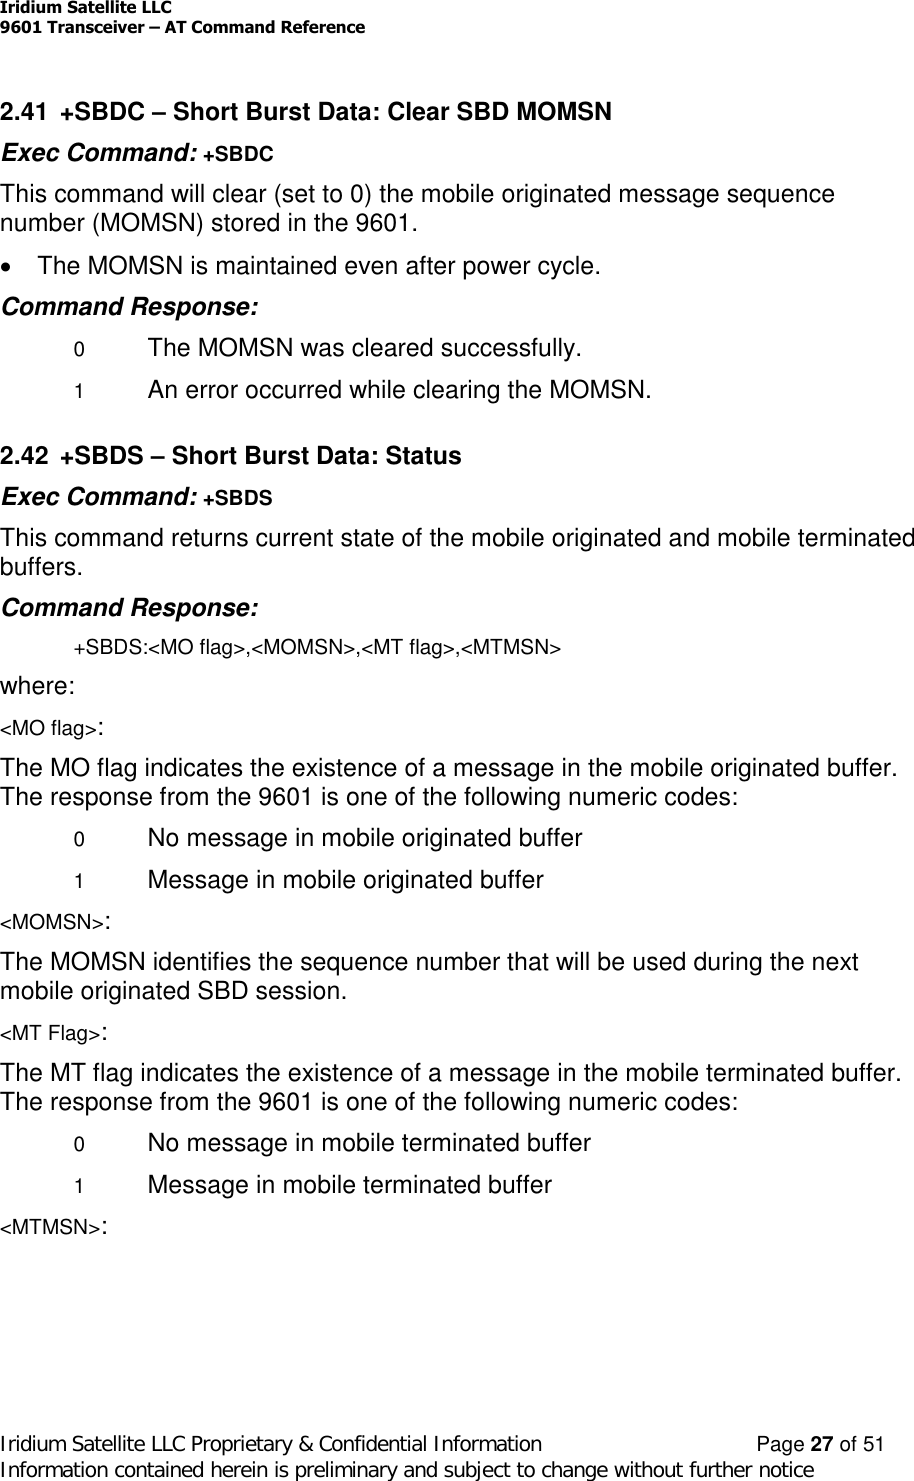 Iridium Satellite LLC9601 Transceiver –AT Command ReferenceIridium Satellite LLC Proprietary &amp; Confidential Information Page 27 of 51Information contained herein is preliminary and subject to change without further notice2.41 +SBDC –Short Burst Data: Clear SBD MOMSNExec Command: +SBDCThis command will clear (set to 0) the mobile originated message sequencenumber (MOMSN) stored in the 9601.The MOMSN is maintained even after power cycle.Command Response:0The MOMSN was cleared successfully.1An error occurred while clearing the MOMSN.2.42 +SBDS –Short Burst Data: StatusExec Command: +SBDSThis command returns current state of the mobile originated and mobile terminatedbuffers.Command Response:+SBDS:&lt;MO flag&gt;,&lt;MOMSN&gt;,&lt;MT flag&gt;,&lt;MTMSN&gt;where:&lt;MO flag&gt;:The MO flag indicates the existence of a message in the mobile originated buffer.The response from the 9601 is one of the following numeric codes:0No message in mobile originated buffer1Message in mobile originated buffer&lt;MOMSN&gt;:The MOMSN identifies the sequence number that will be used during the nextmobile originated SBD session.&lt;MT Flag&gt;:The MT flag indicates the existence of a message in the mobile terminated buffer.The response from the 9601 is one of the following numeric codes:0No message in mobile terminated buffer1Message in mobile terminated buffer&lt;MTMSN&gt;: